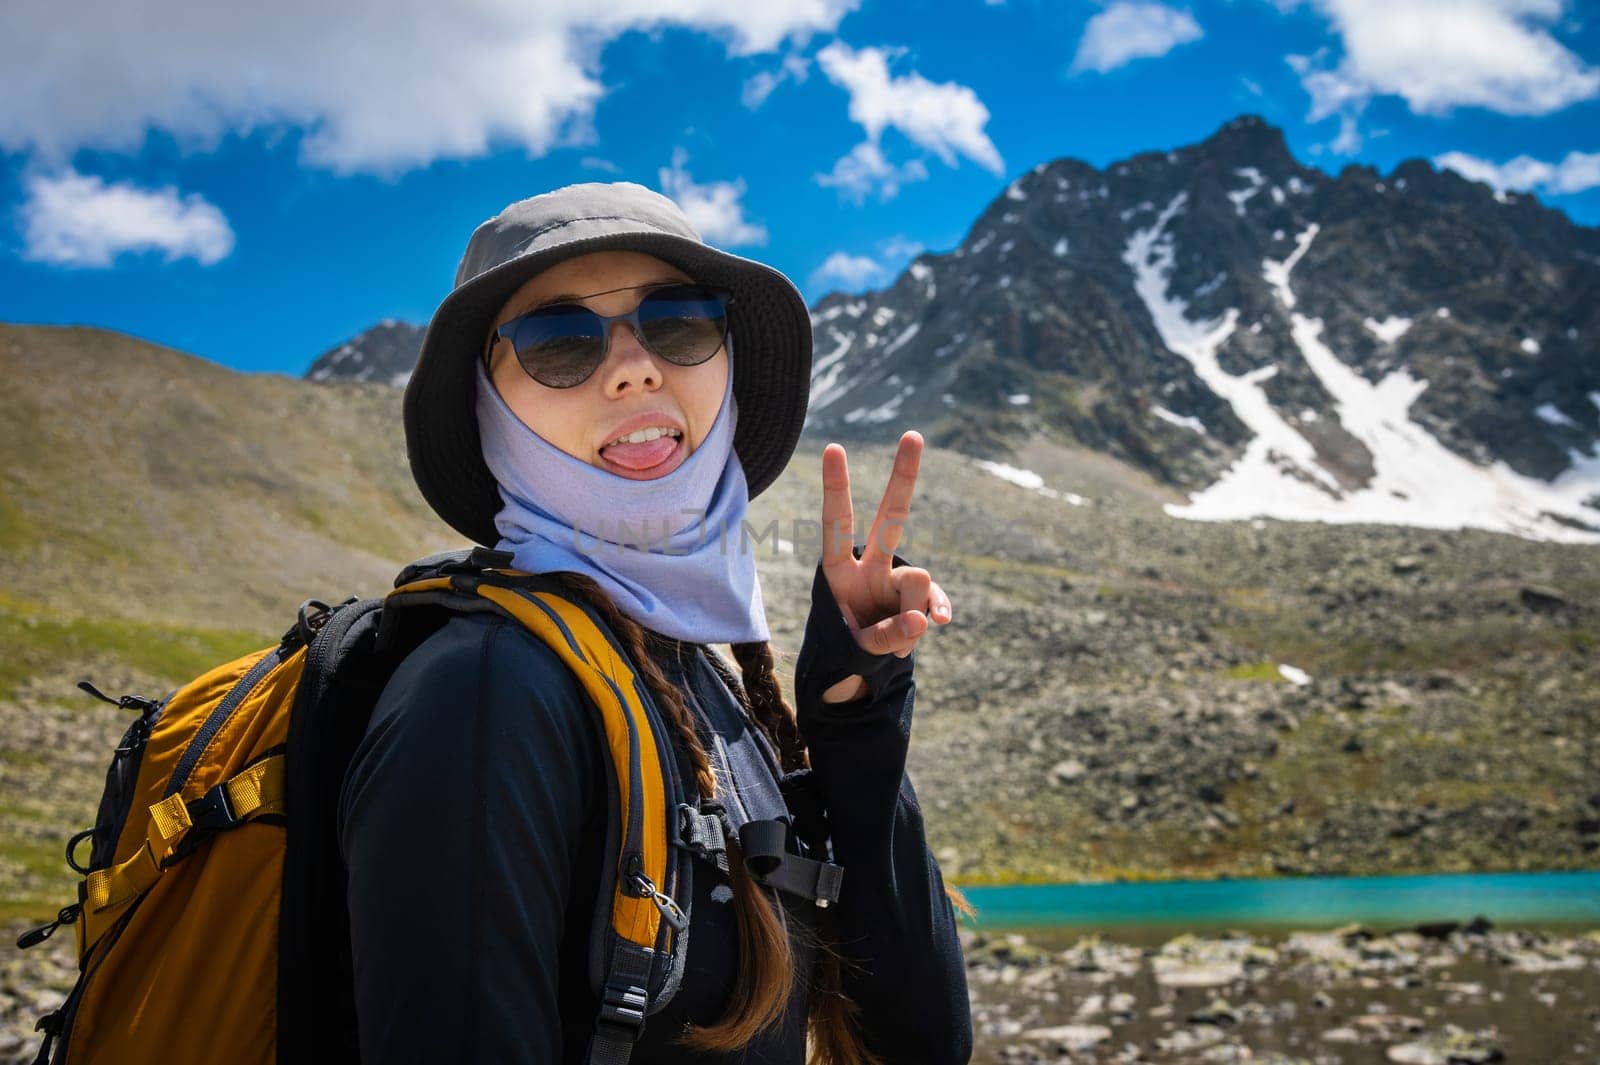 hipster shows tongue, funny face, posing in the countryside on a sunny day, stylish hat and sunglasses. woman with a backpack on a hike rejoices.